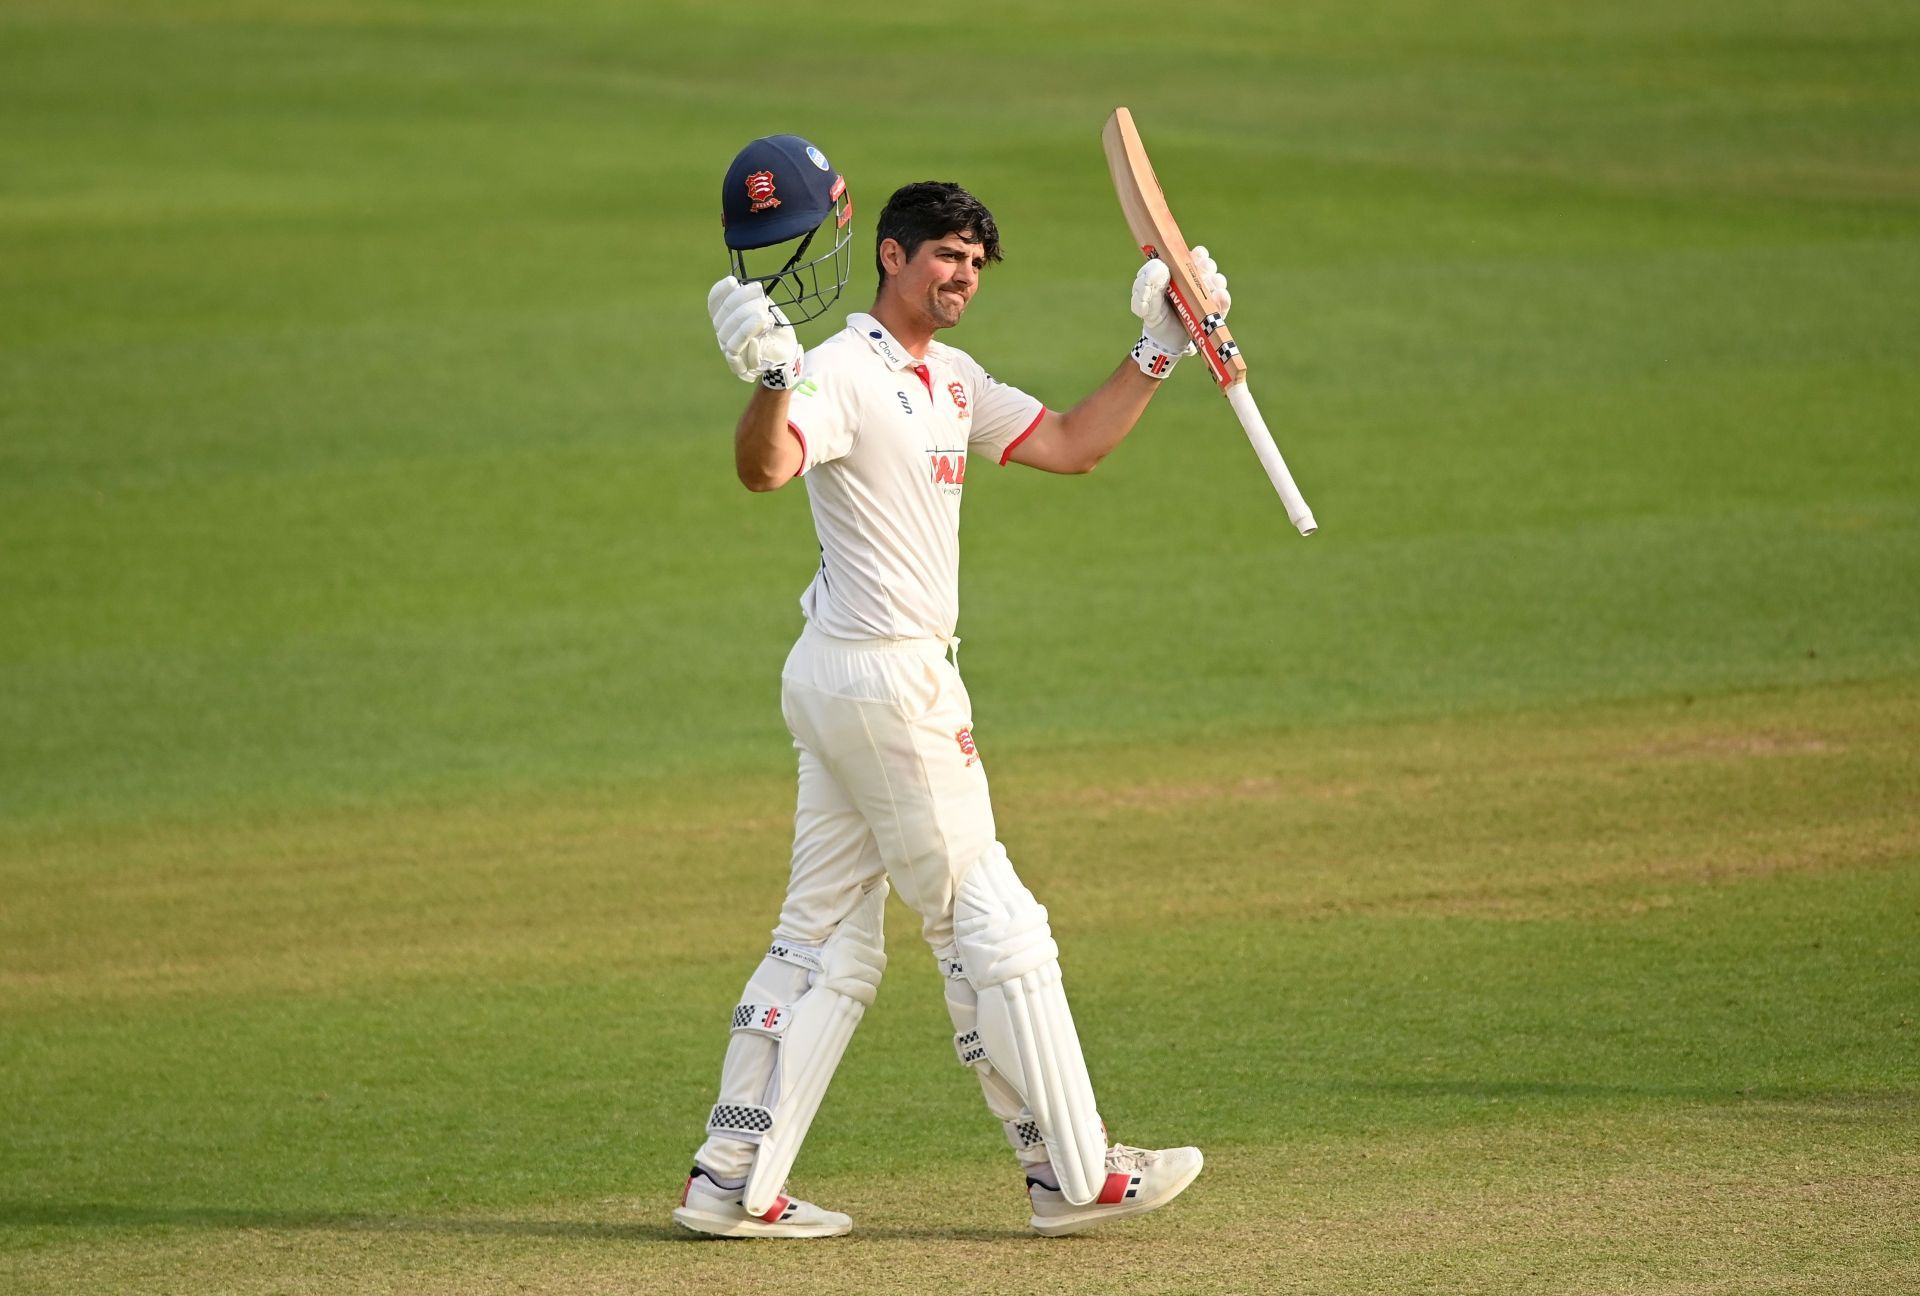 Alastair Cook celebrates his century during a County Championship match between Essex and Yorkshire on May 5, 2022, in Chelmsford. (Getty Images)